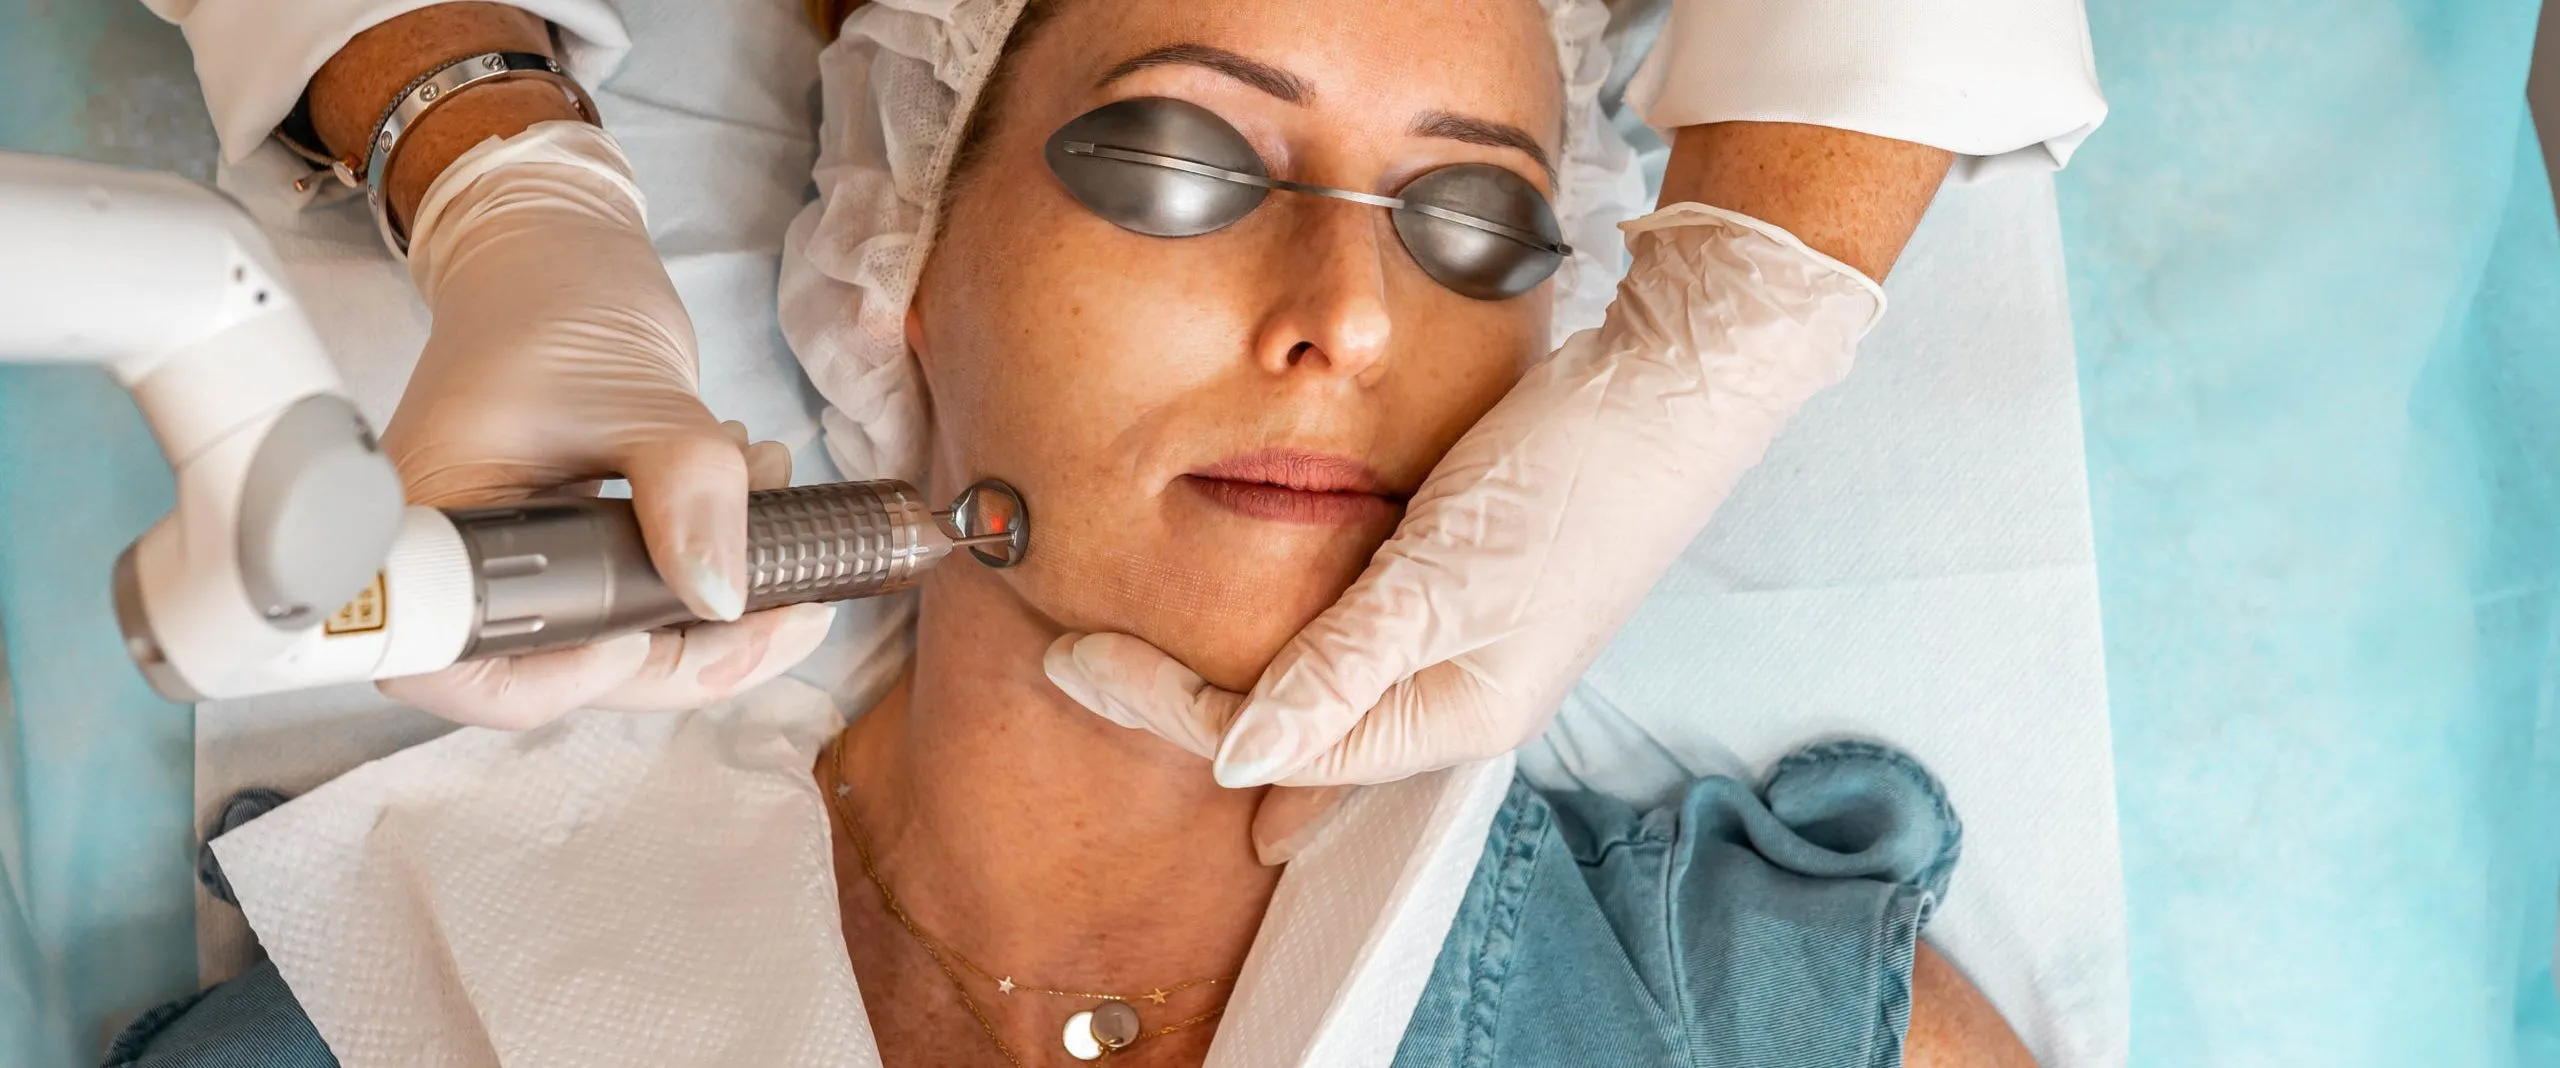 How To Care For Your Skin After Laser Treatments